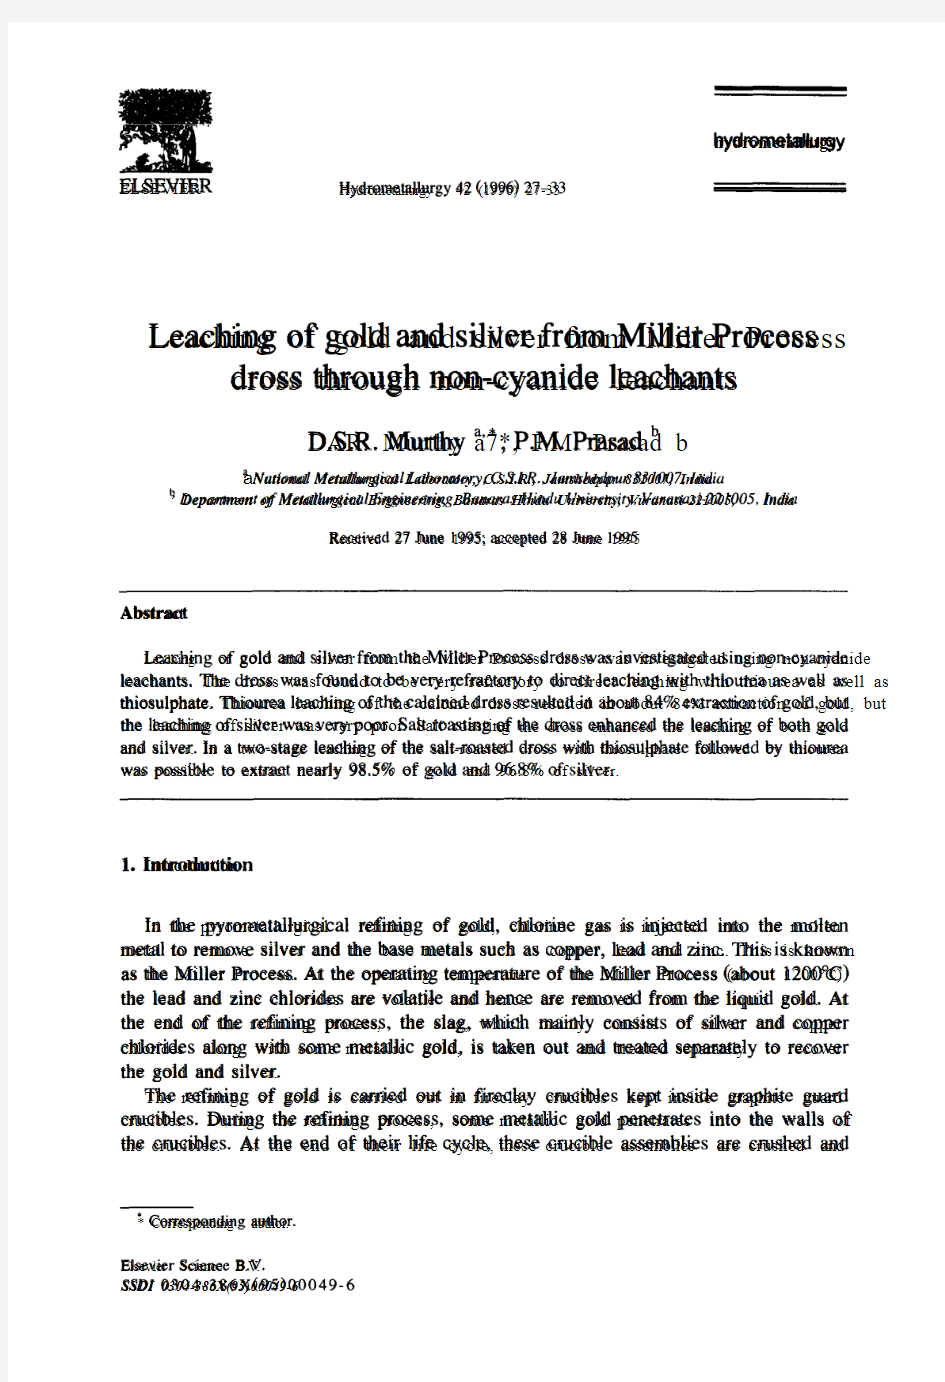 Leaching of gold and silver from Miller Process dross through non-cyanide leachants